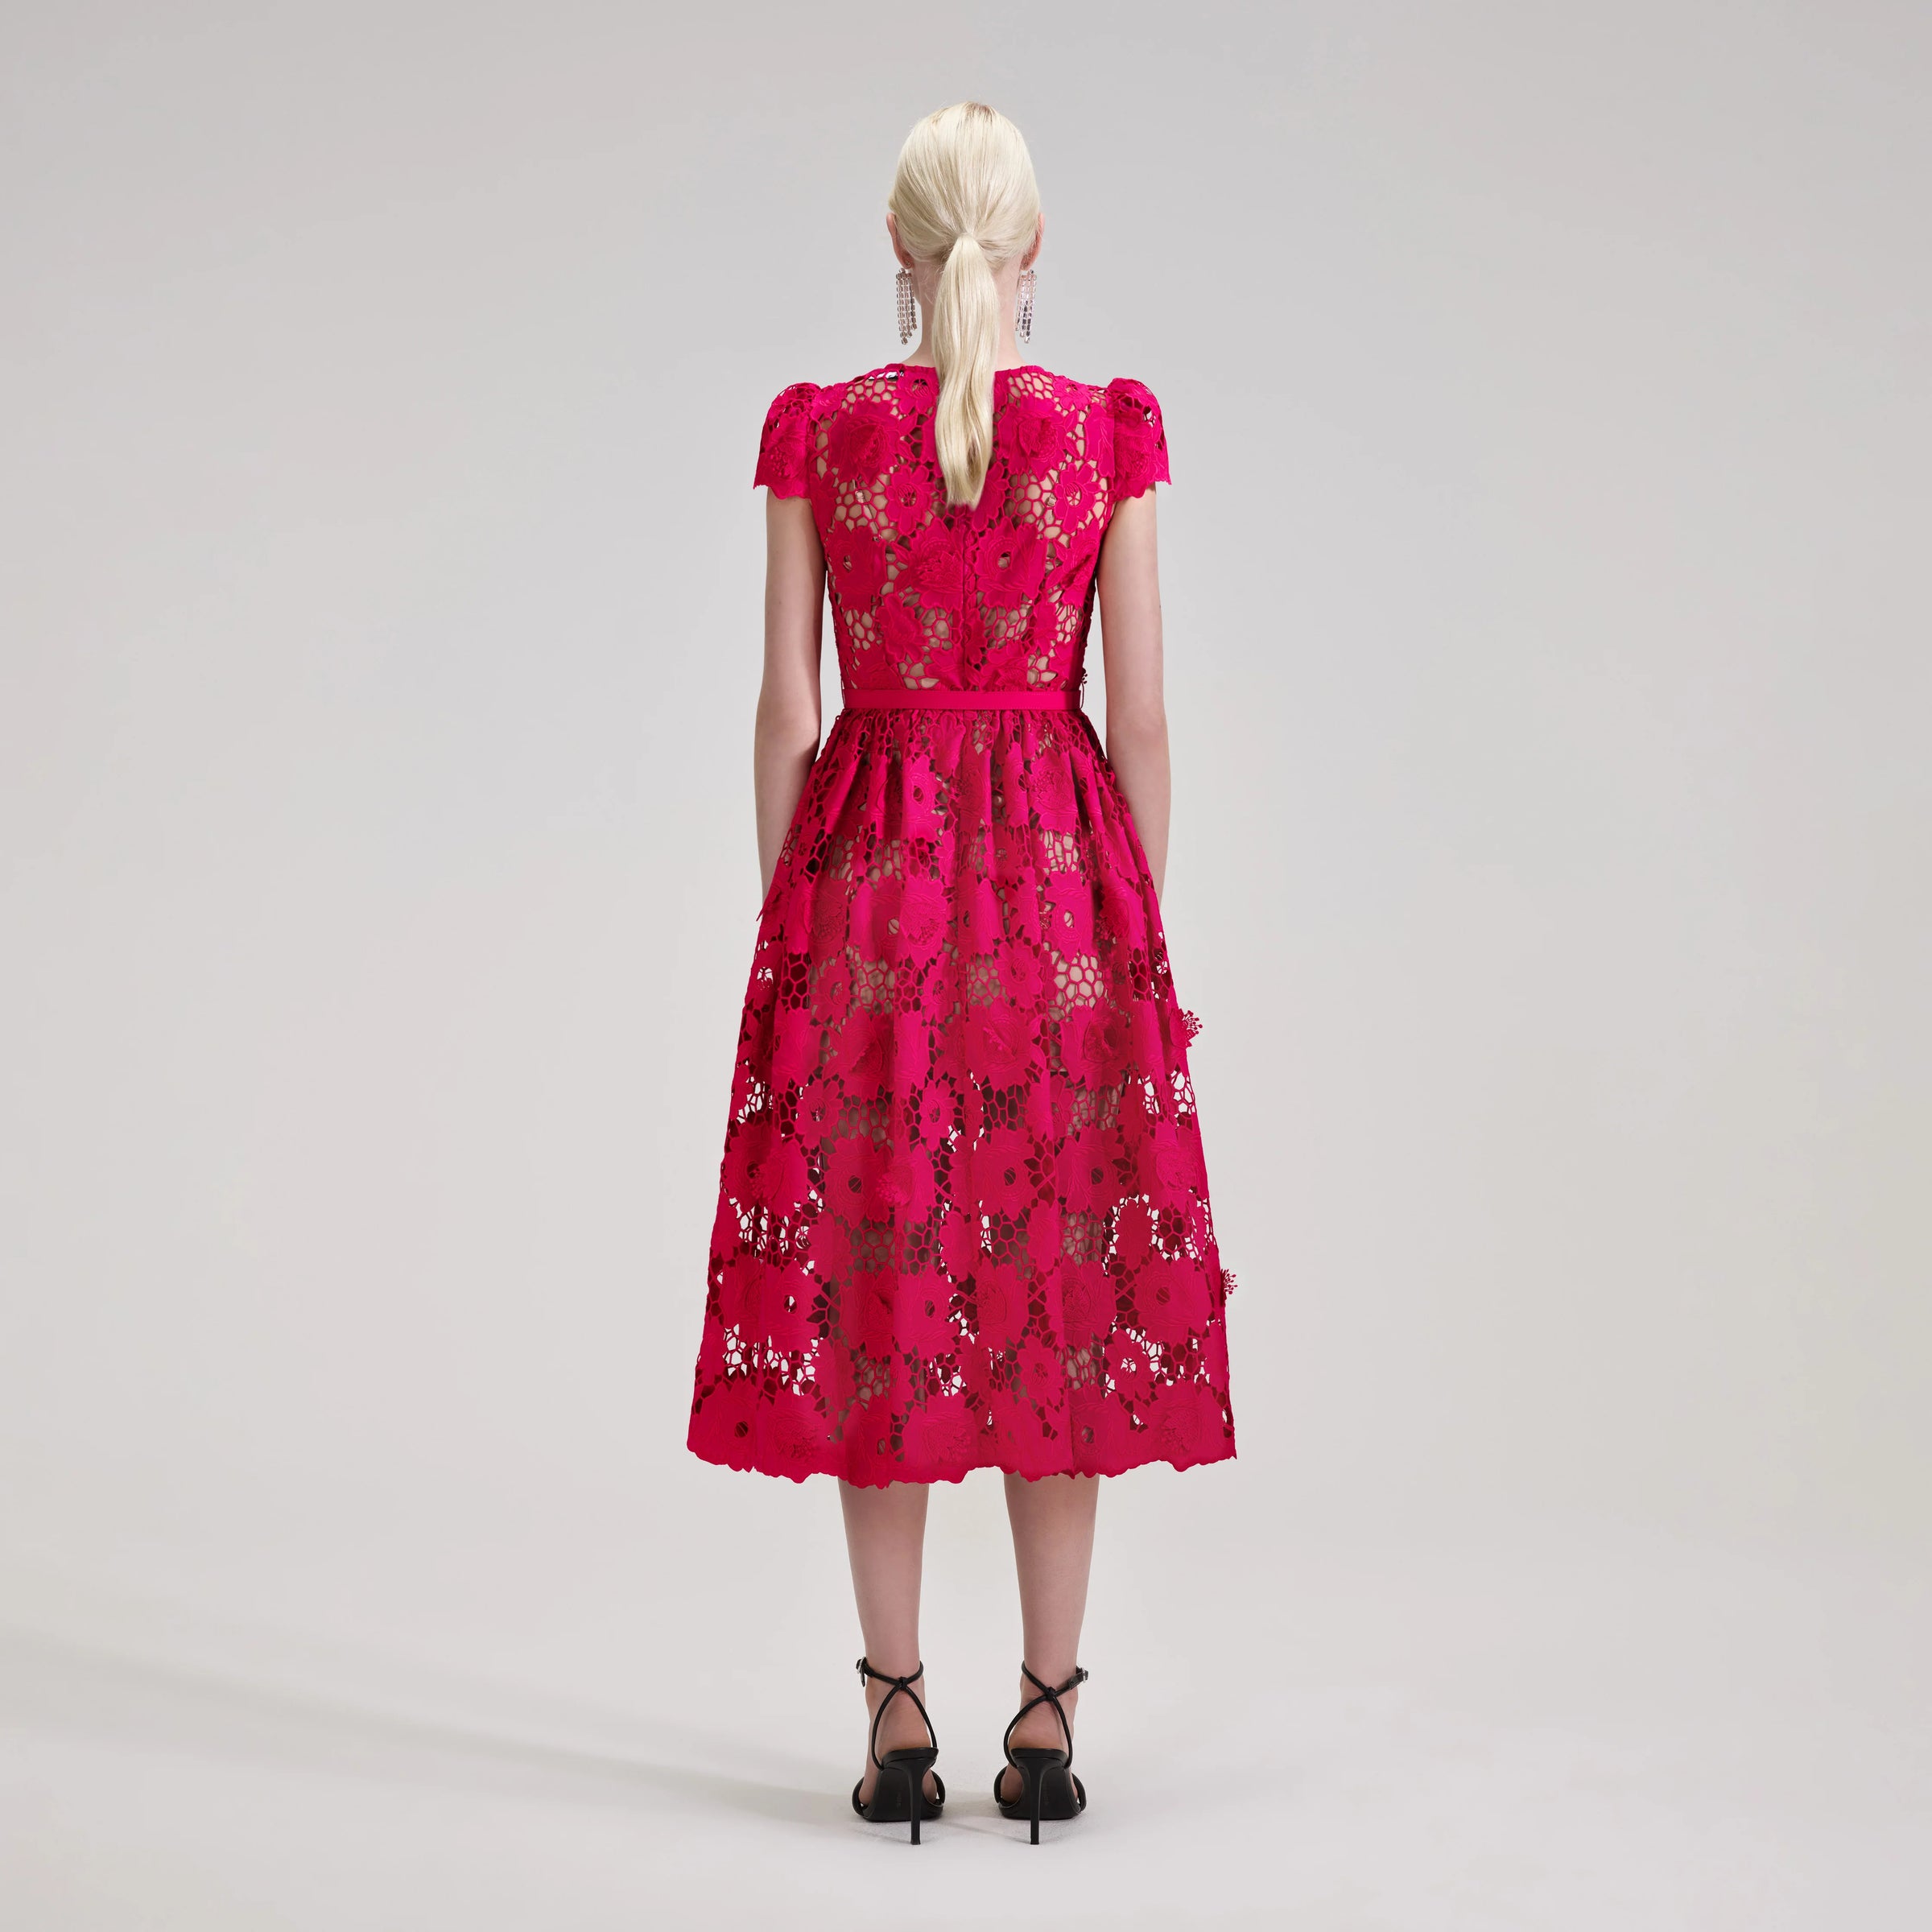 Raspberry pink lace midi dress with fitted bodice capped sleeves and tulip shaped skirt with detachable slip and fabric belt